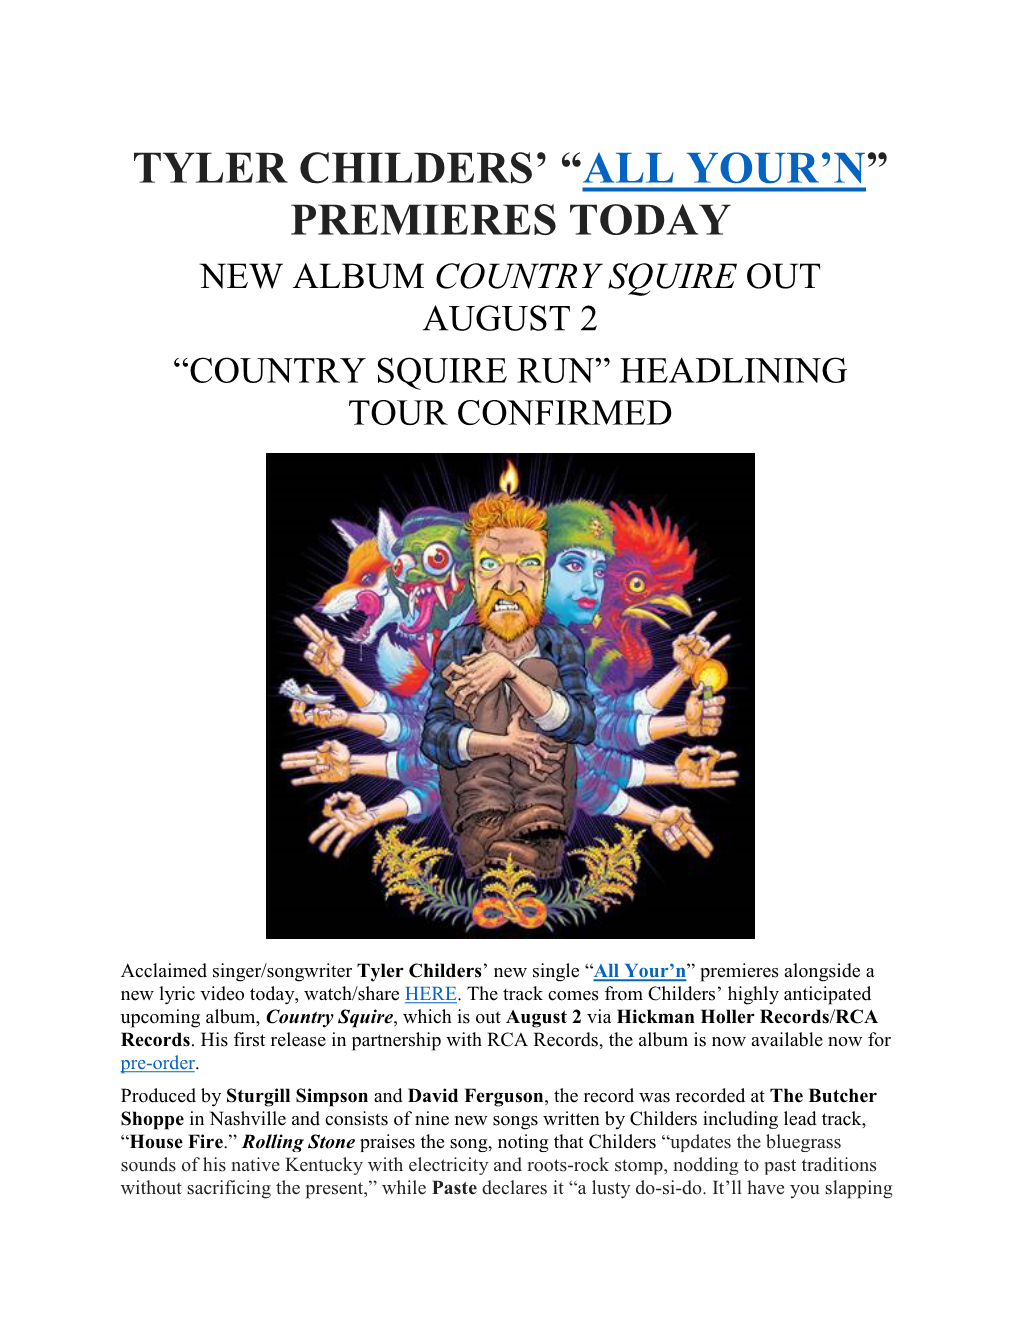 Tyler Childers' “All Your'n” Premieres Today